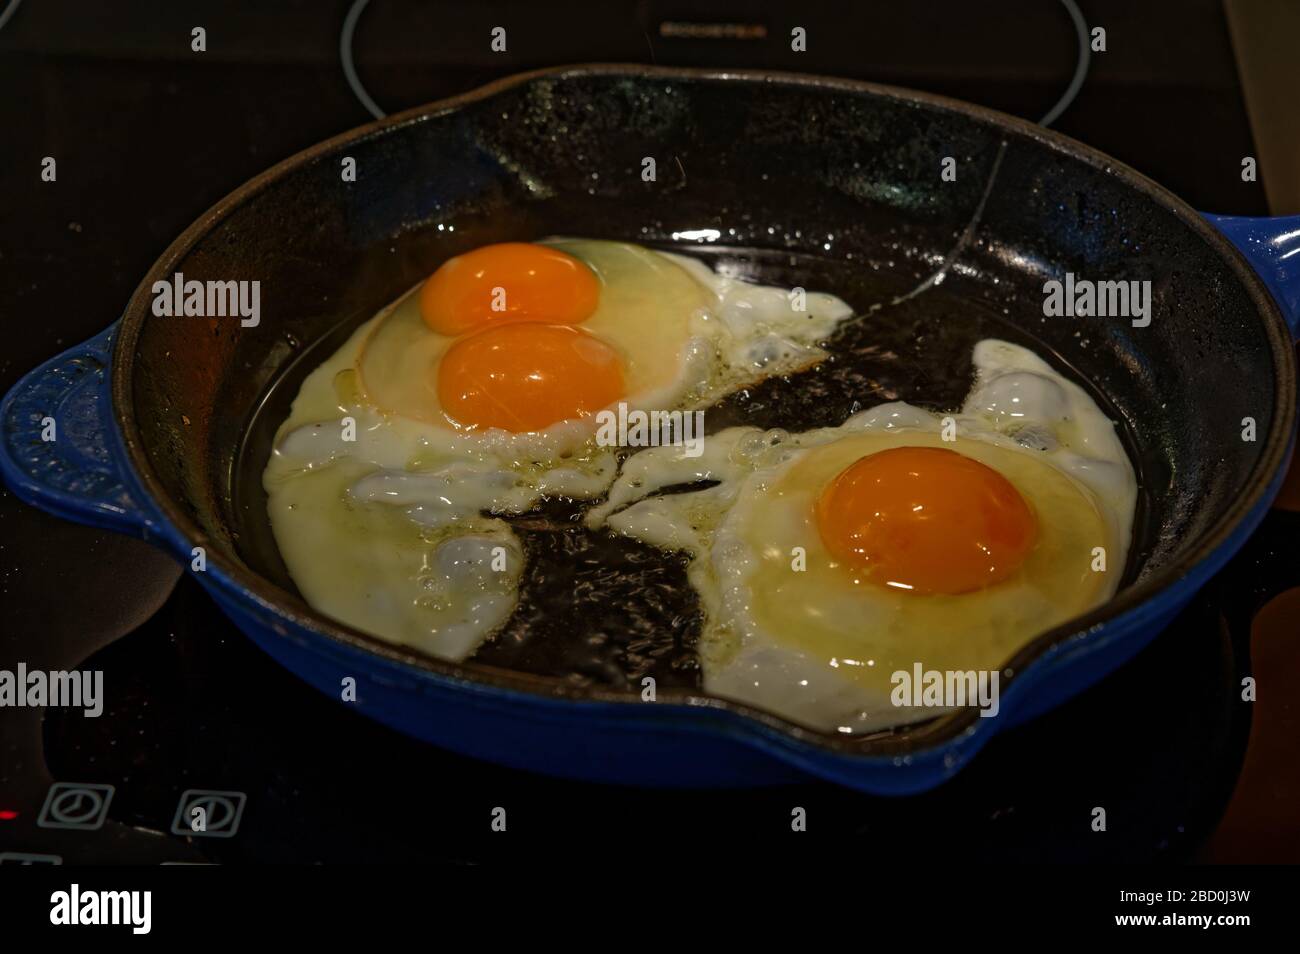 If superstitious a double yolked egg is meant to signify a pregnancy in the family Stock Photo